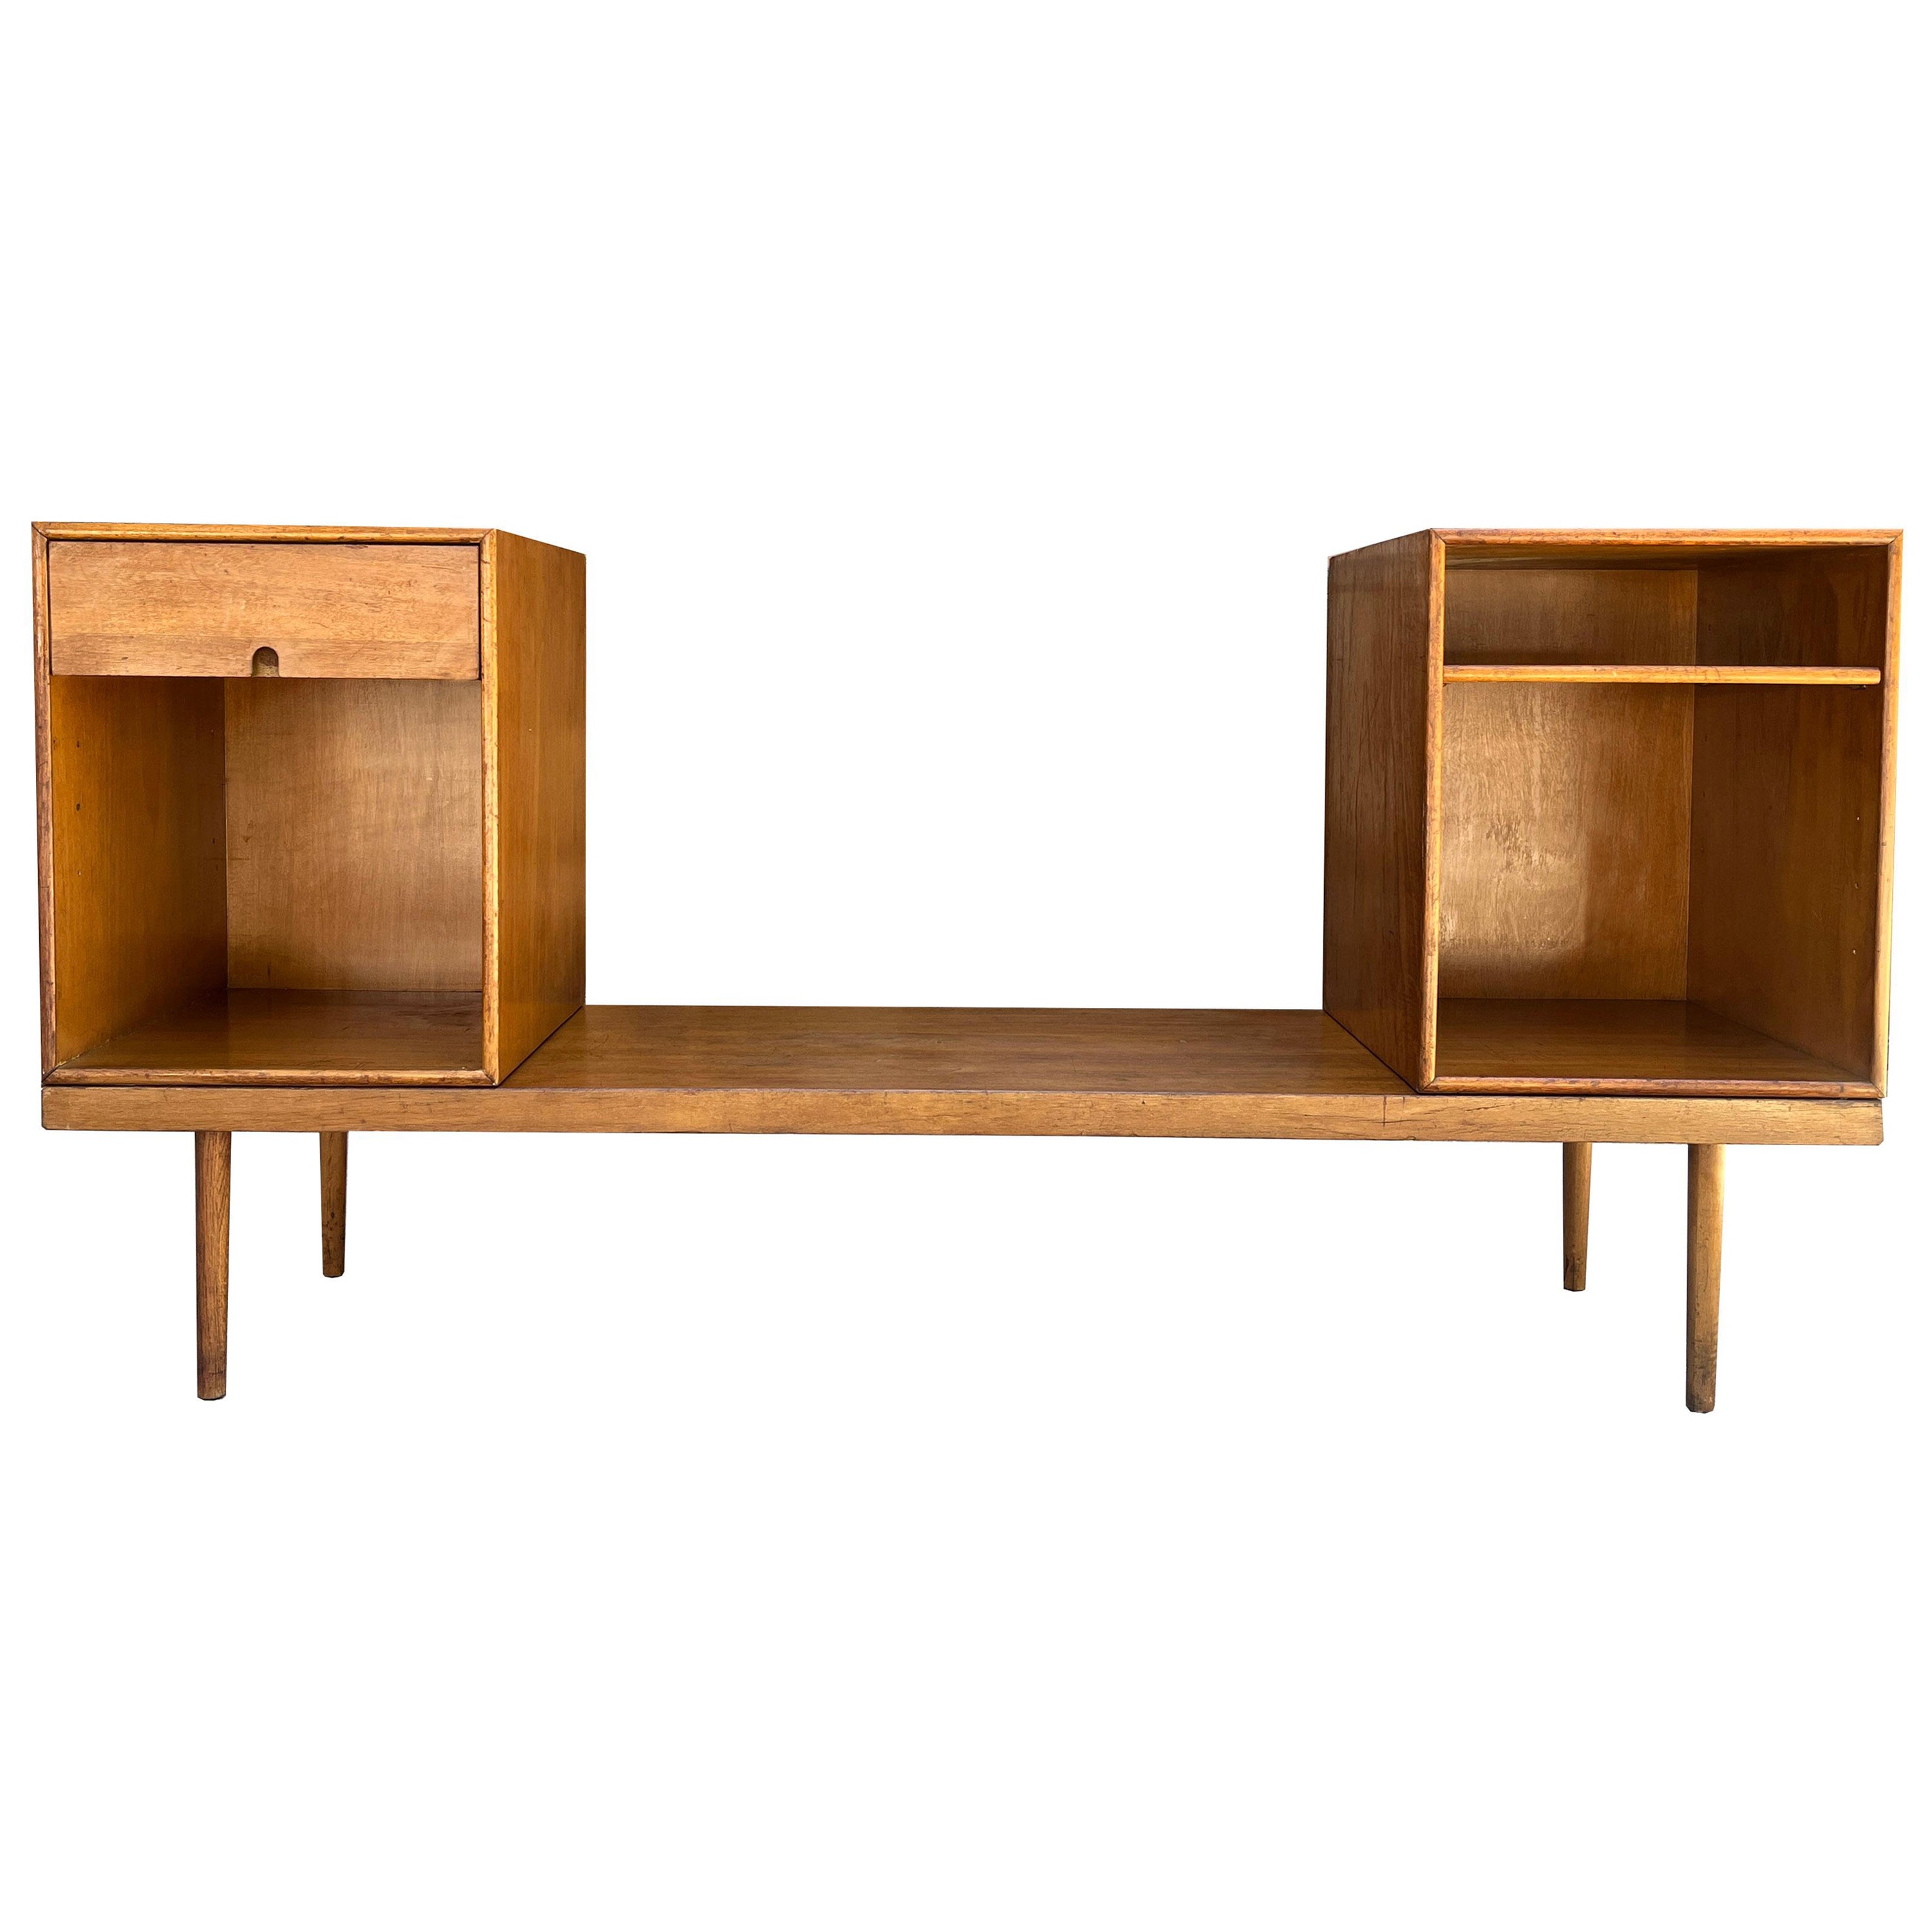 Rare and Important Midcentury Bench/Cabinets- Eames and Saarinen -Organic Design For Sale